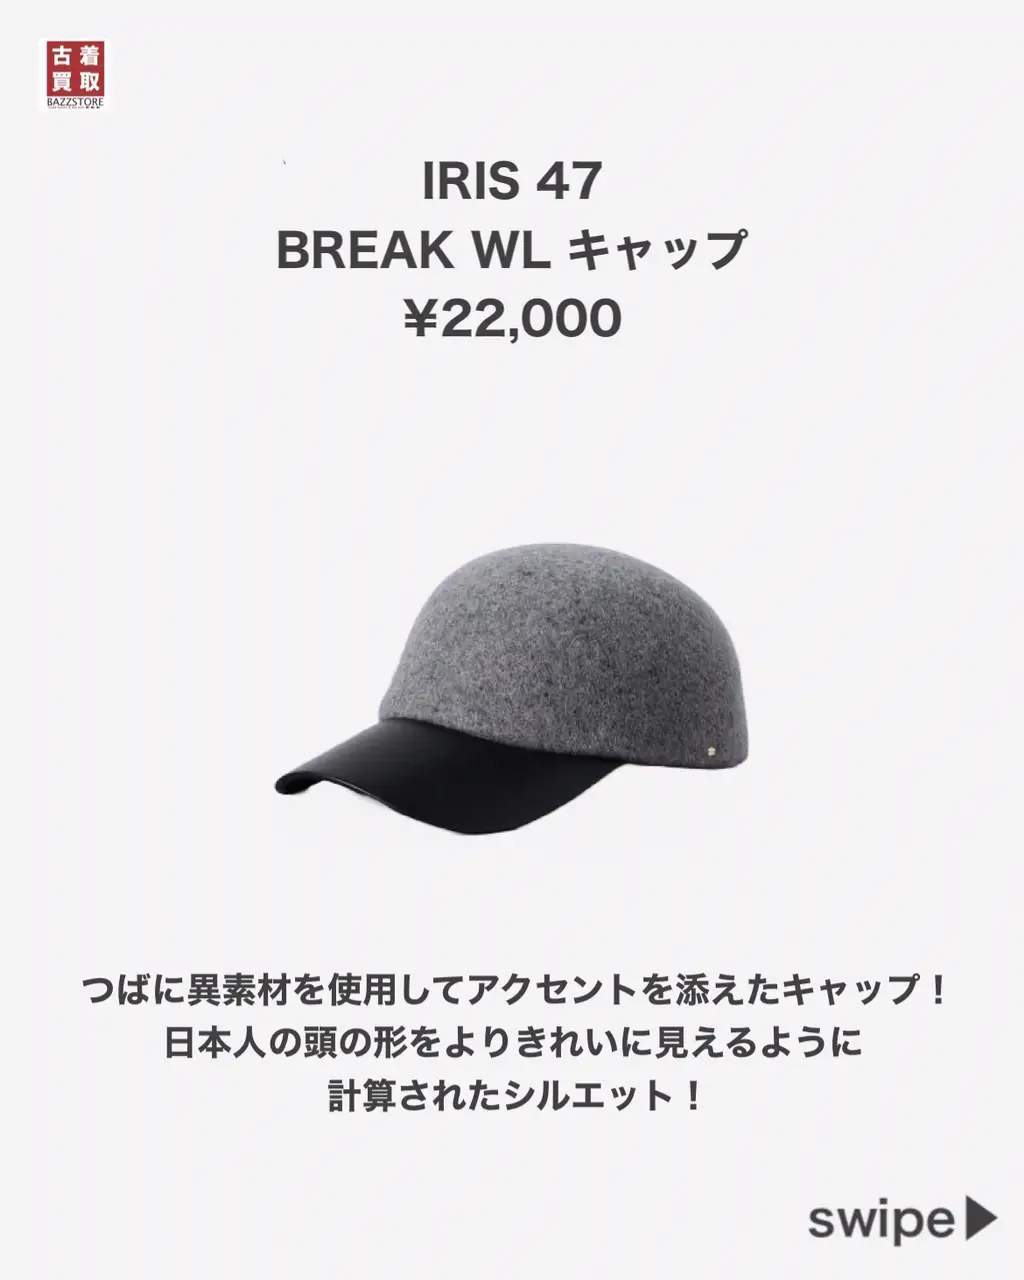 I want to match various outfits! Recommended cap 🧢 5 selections